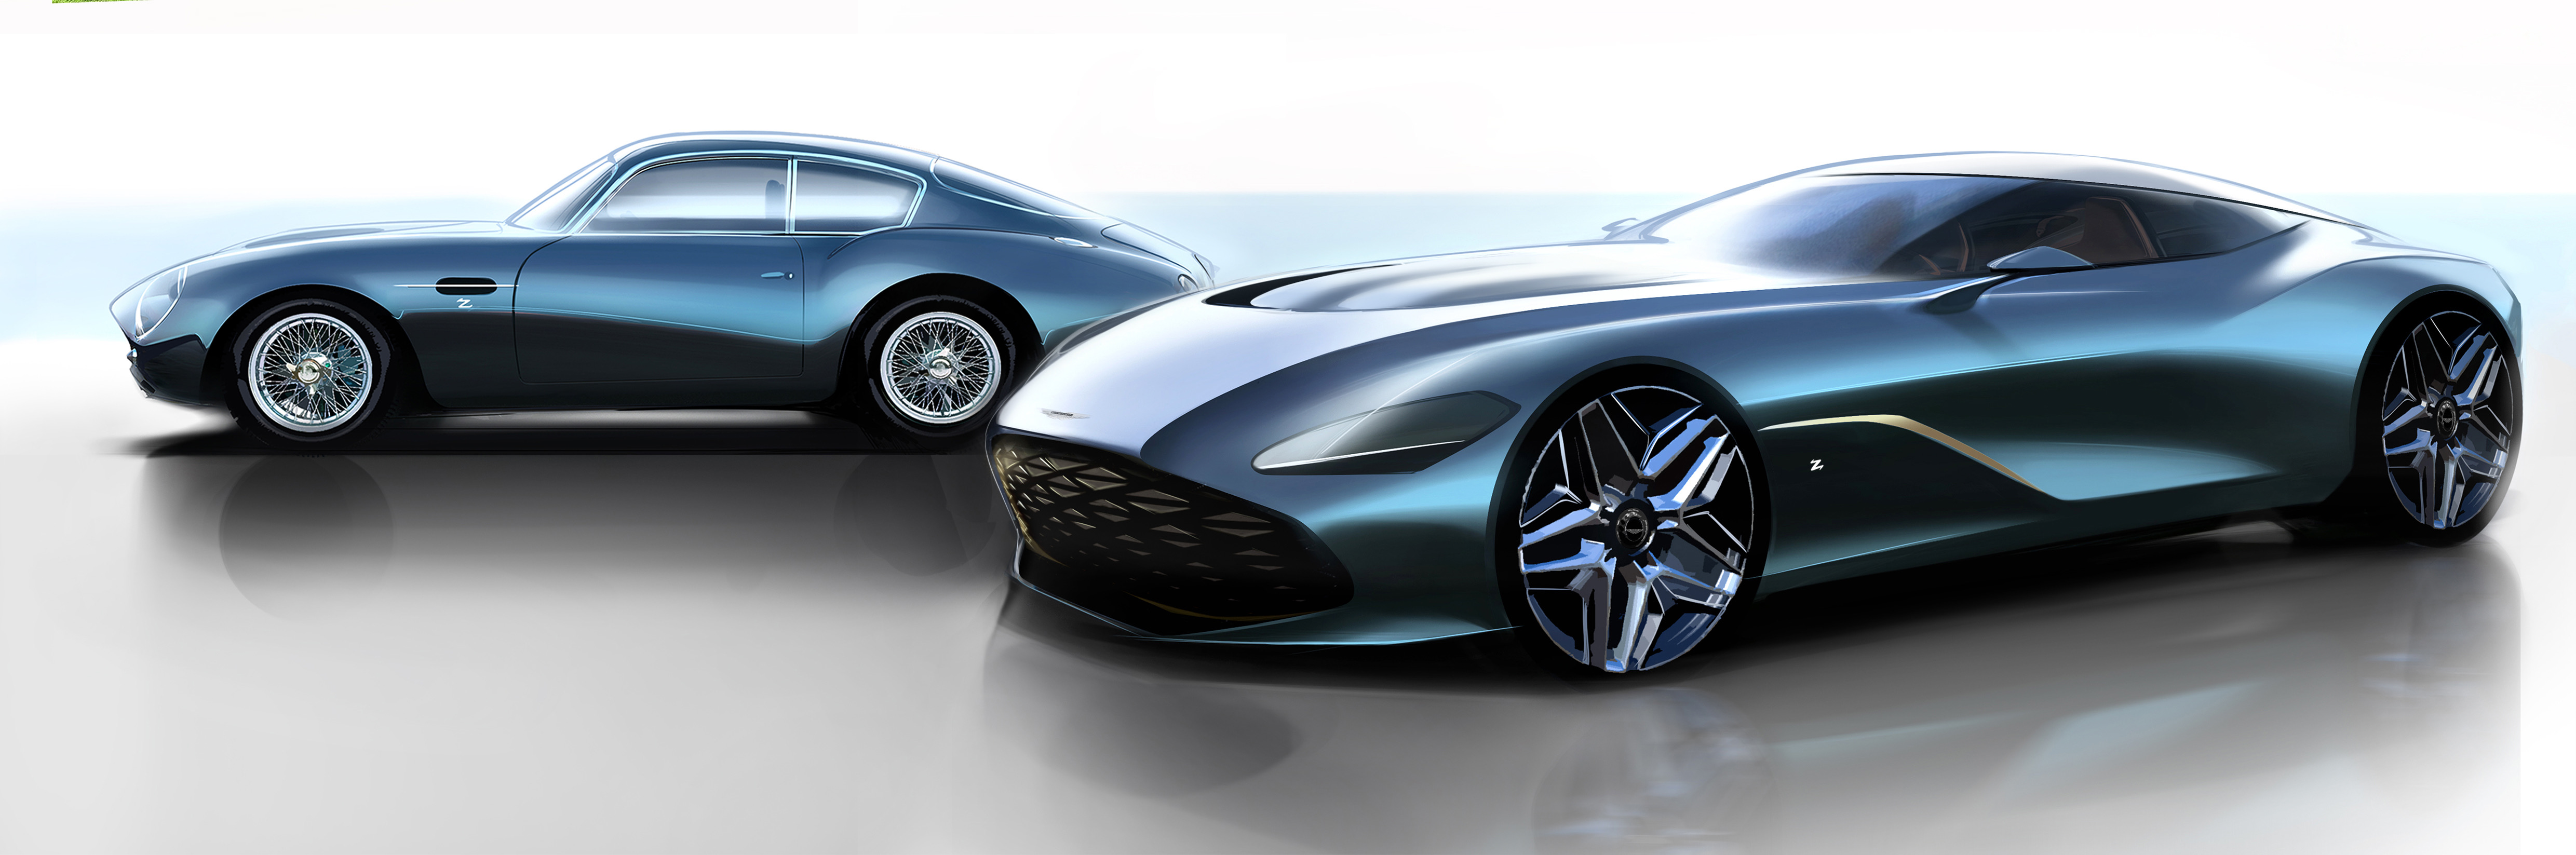 Zagato, Aston Martin shares detailed drawings of DBS GT Zagato, ClassicCars.com Journal